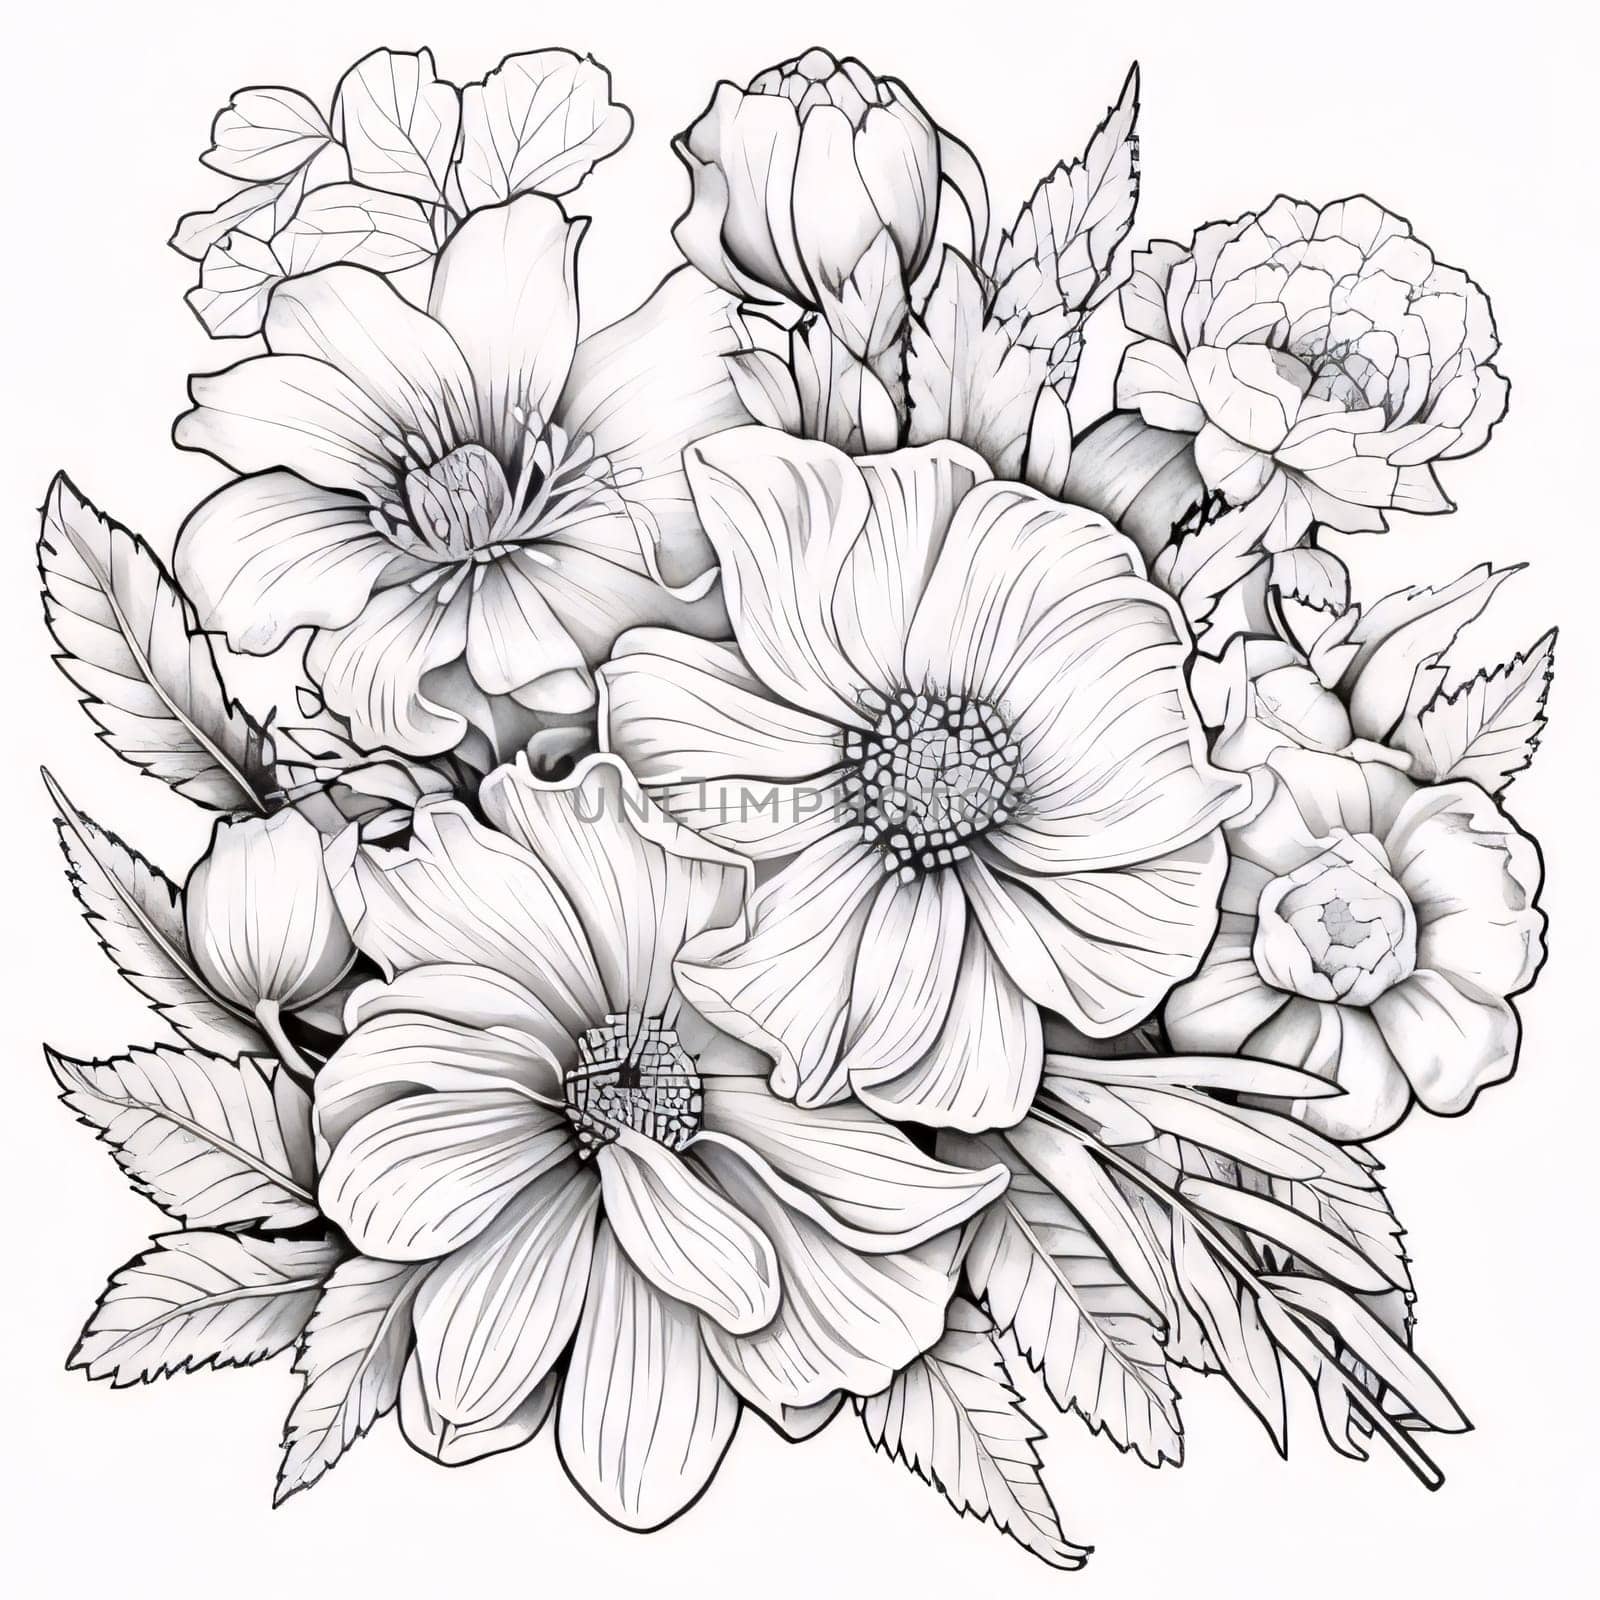 Black and white coloring sheet bouquet of flowers. Flowering flowers, a symbol of spring, new life. by ThemesS